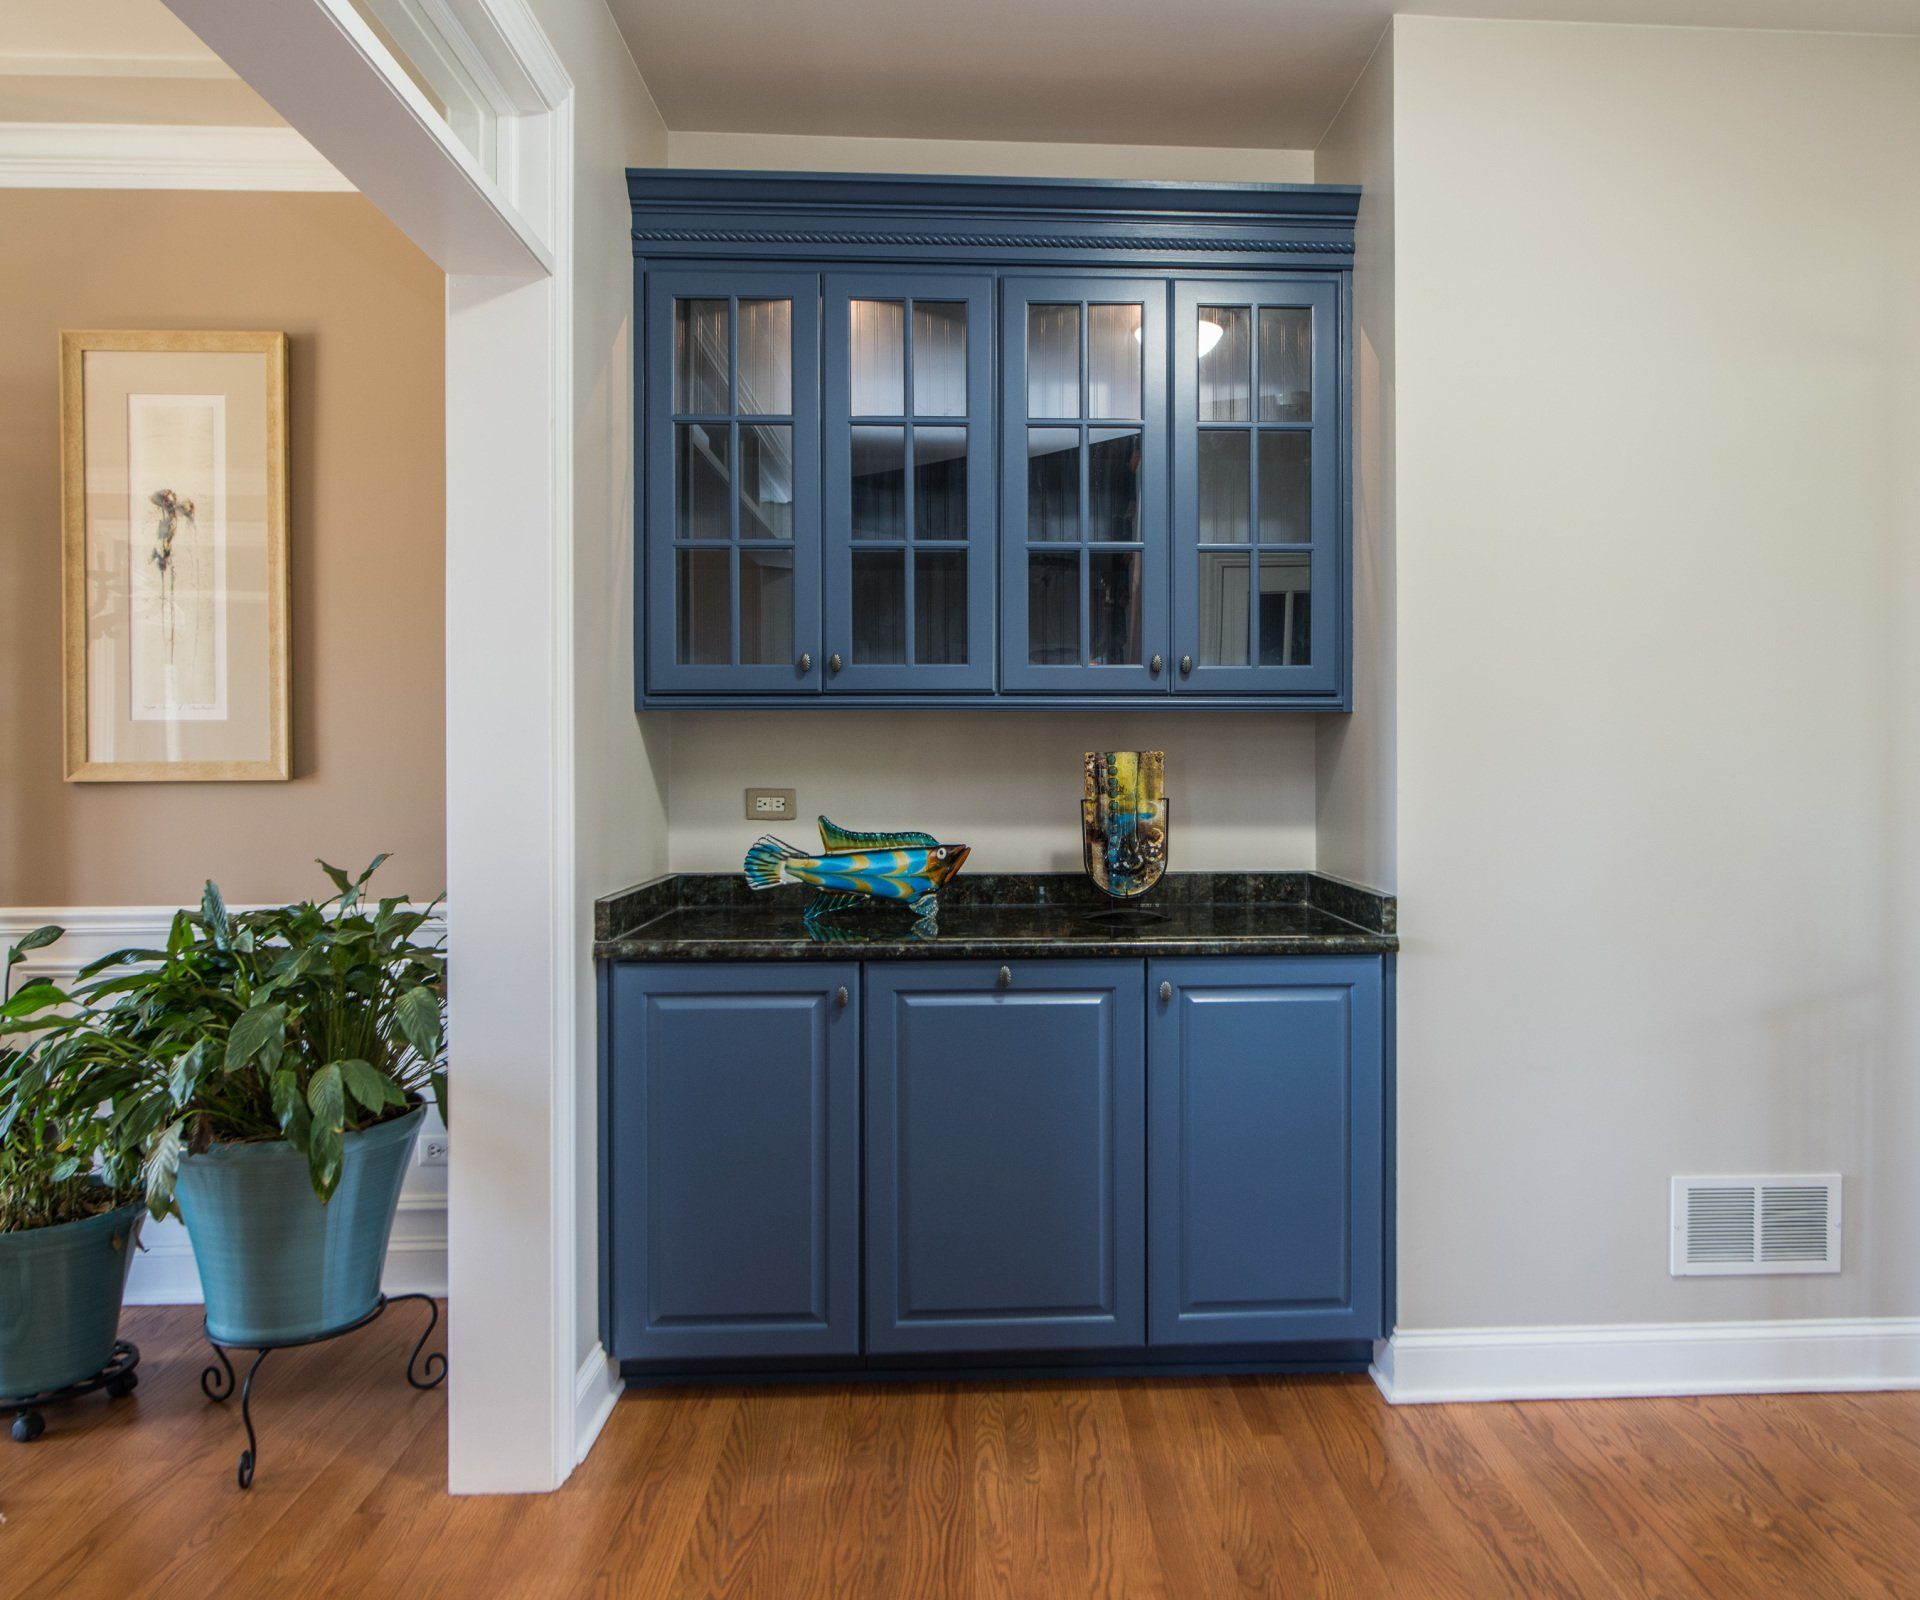 a kitchen with blue cabinets and a plant in a pot .